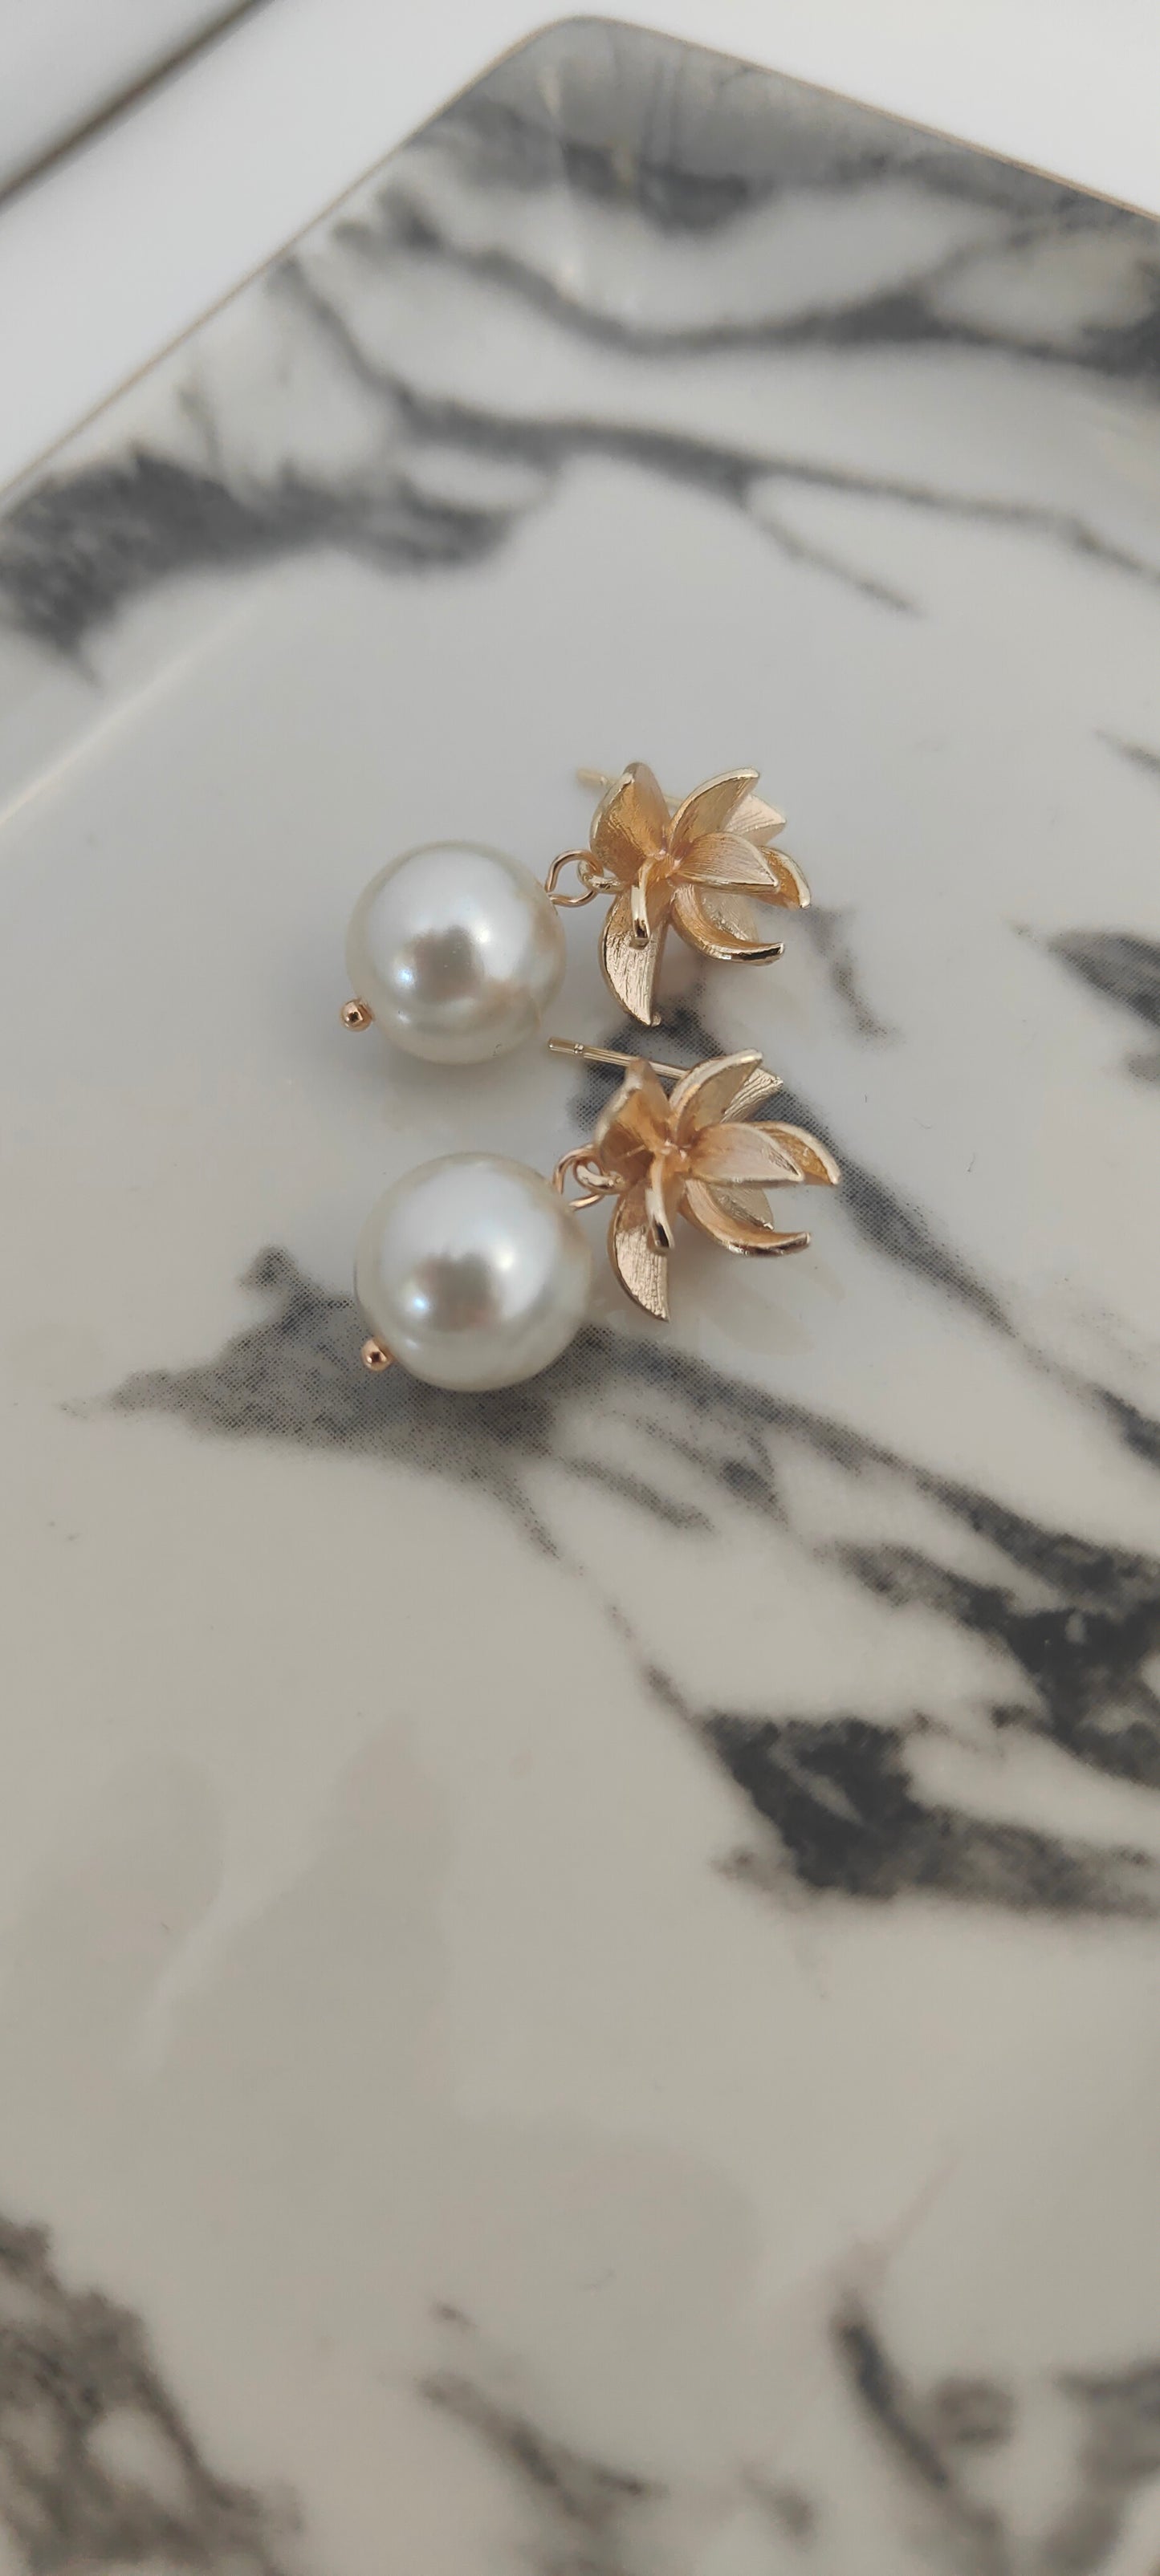 OPHELIA - Statement Pearl & Gold Bridal Earrings